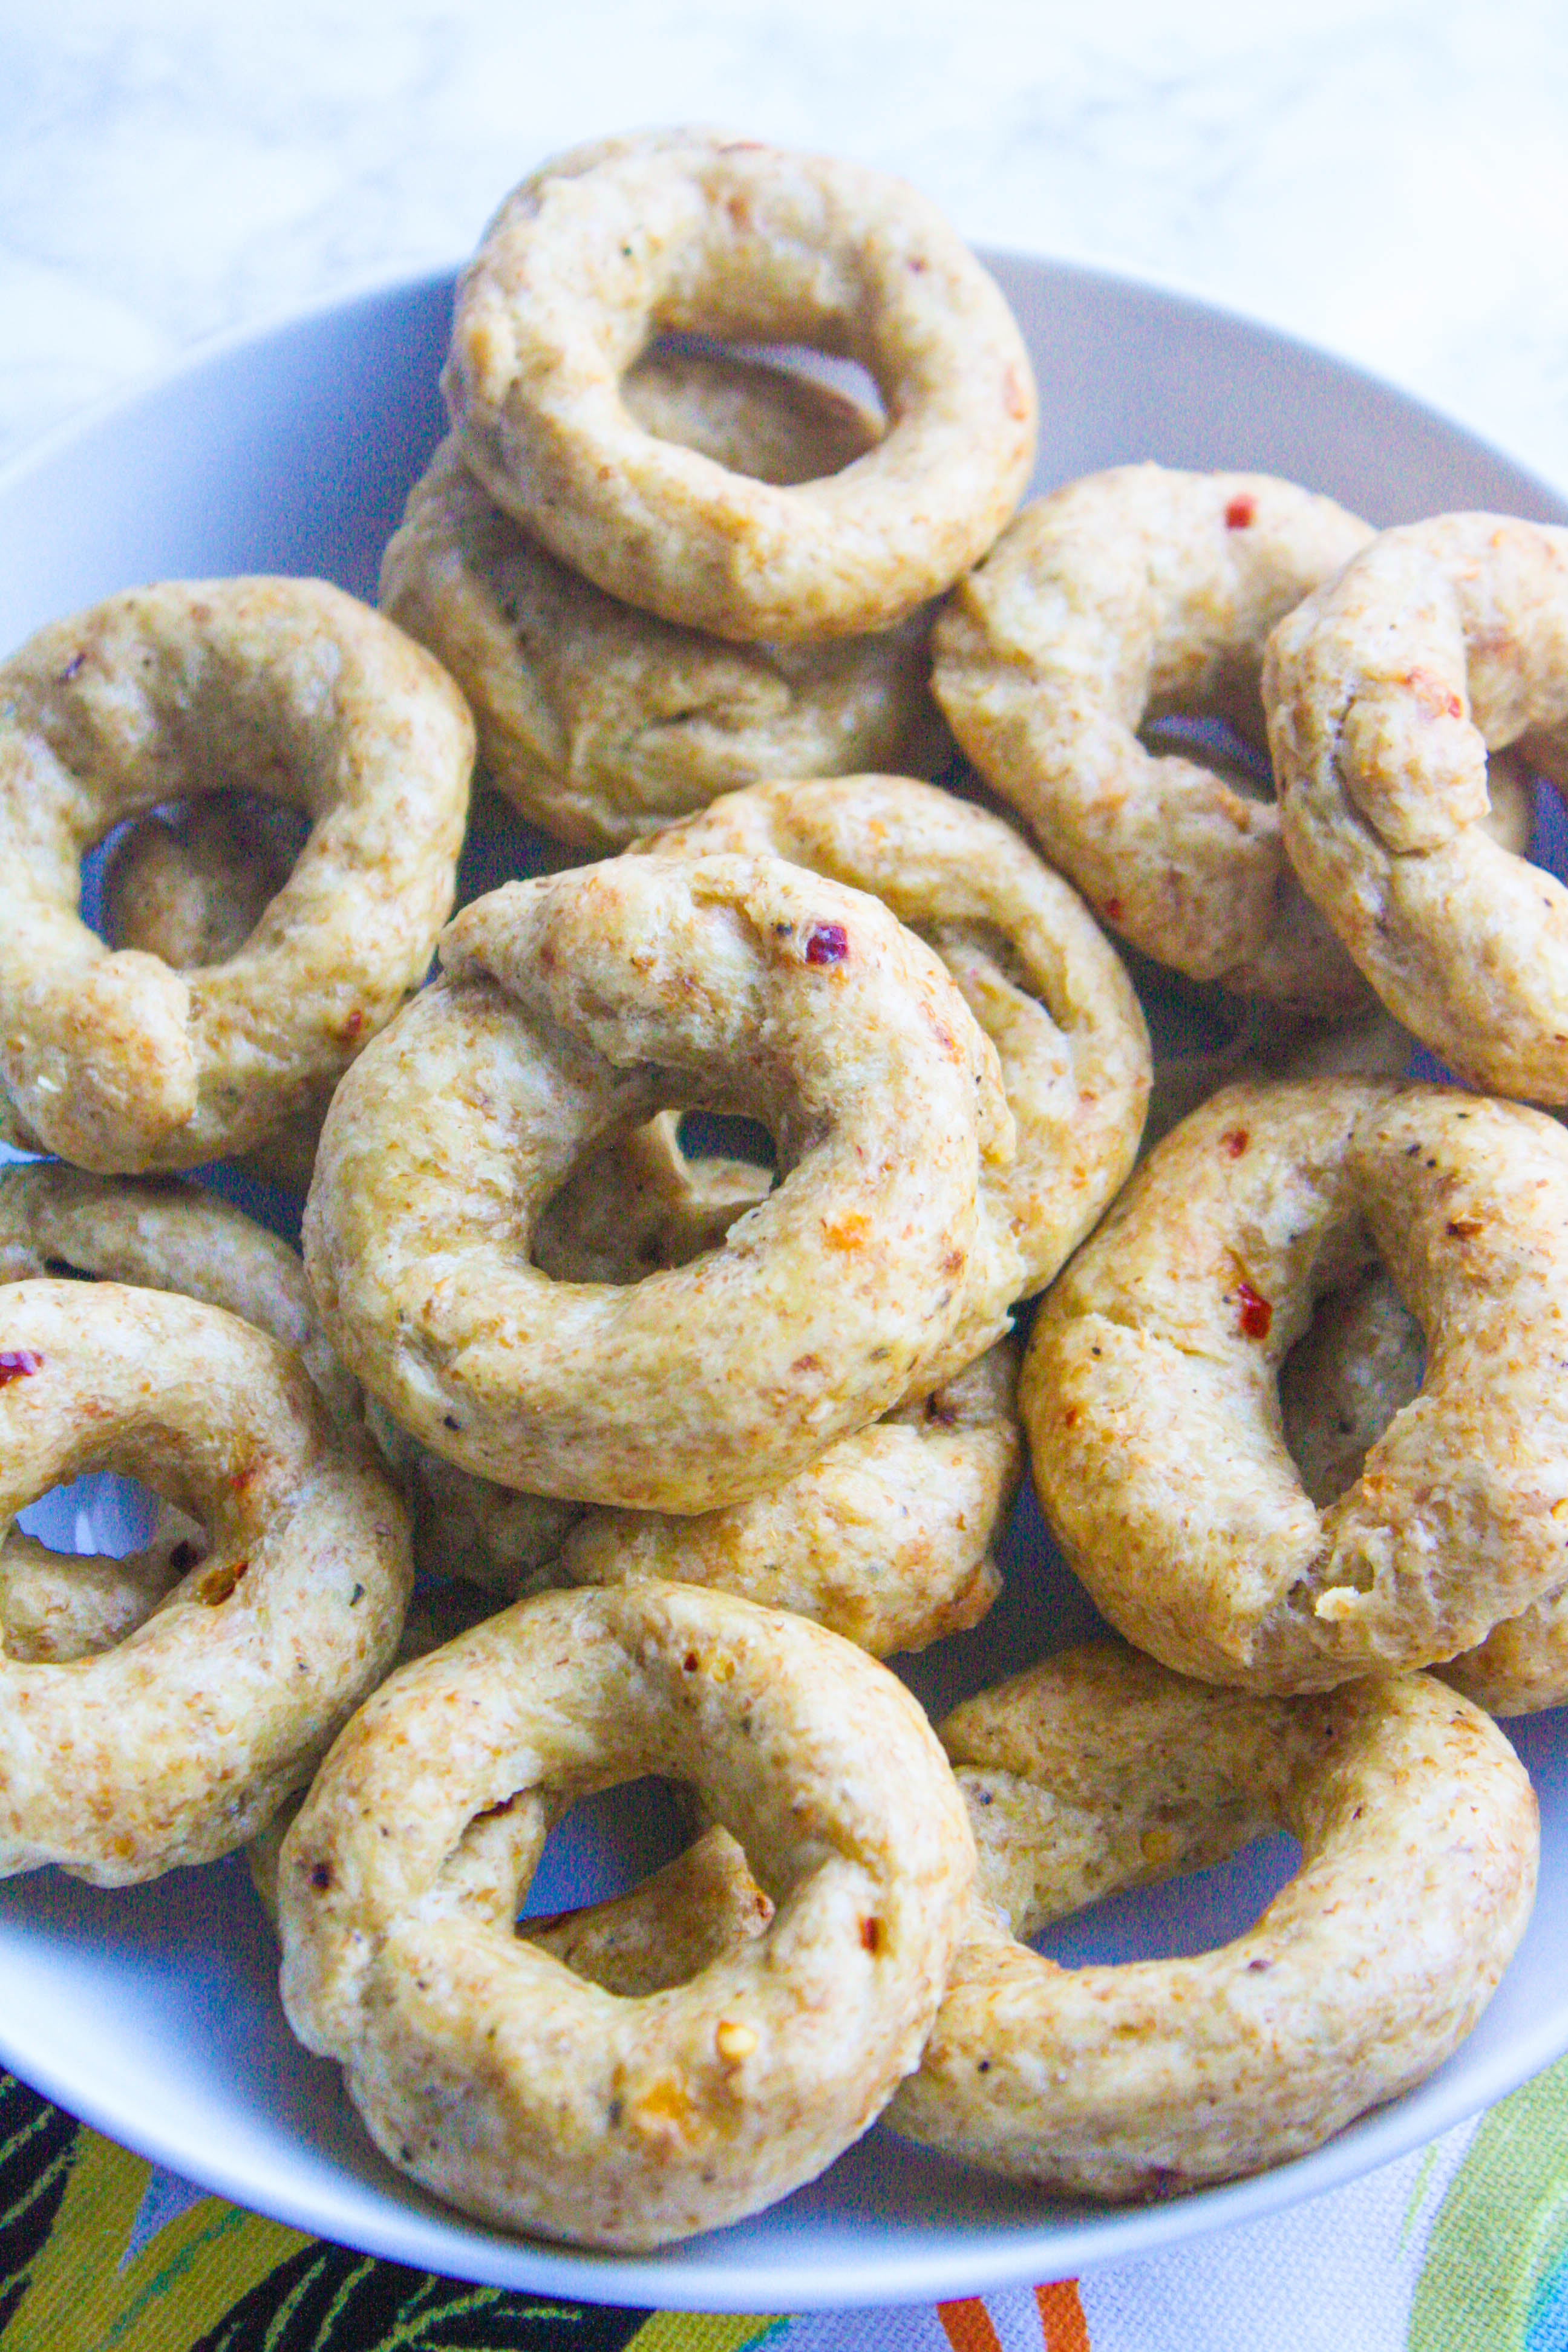 Red Pepper Italian Taralli (Breadstick Rings) are fun snacks to serve. You'll enjoy Red Pepper Italian Taralli (Breadstick Rings) as a traditional Italian snack.